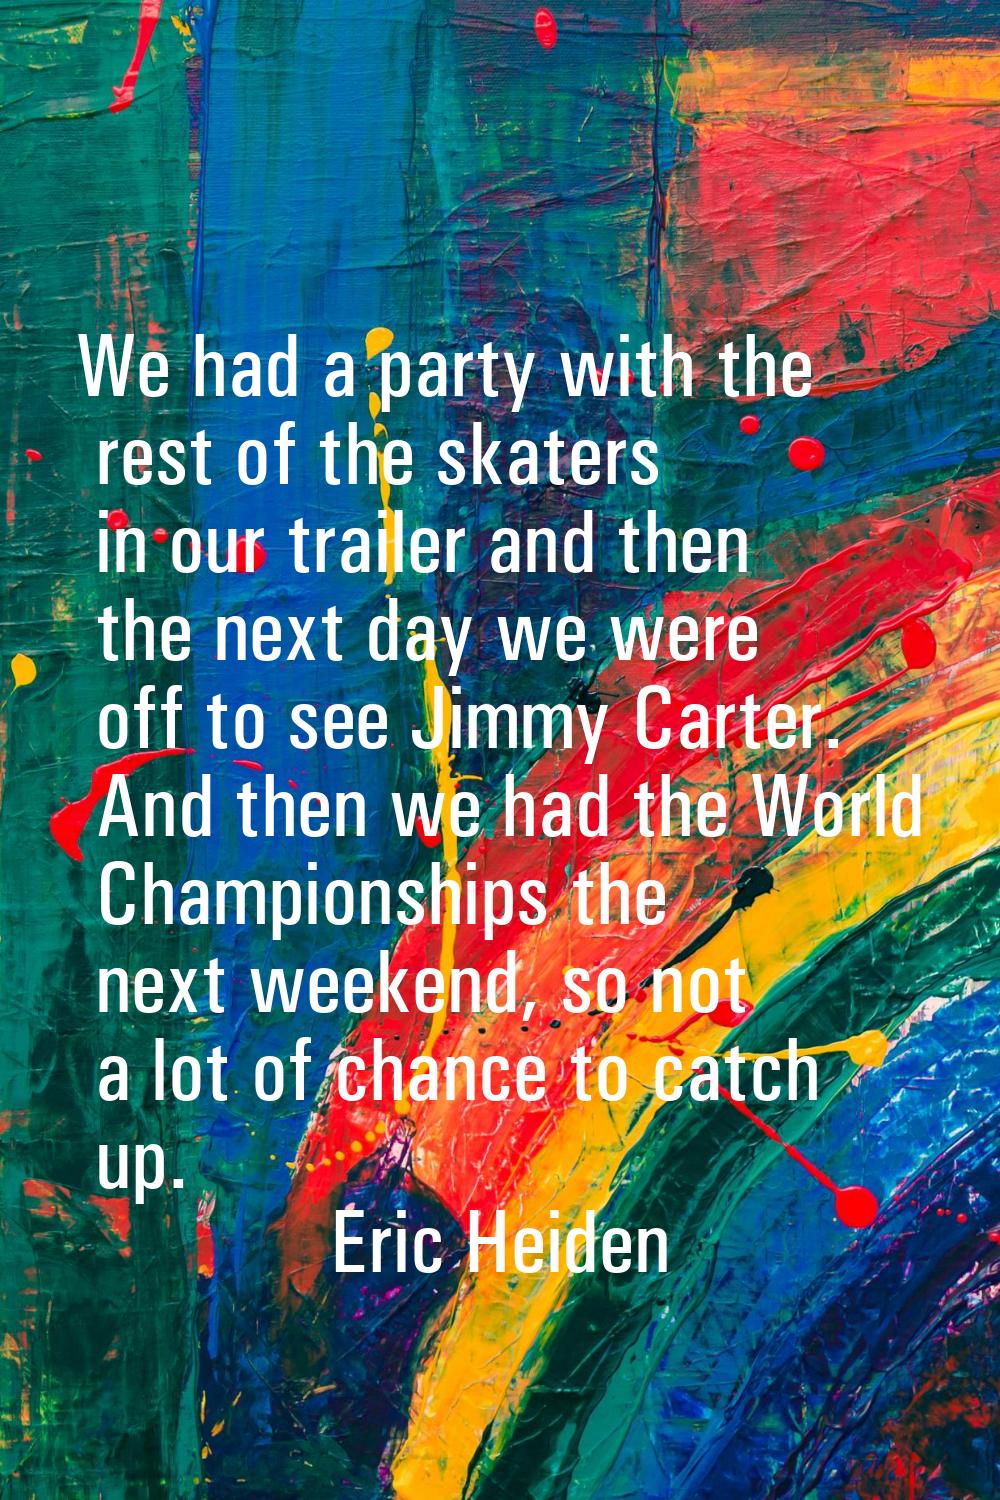 We had a party with the rest of the skaters in our trailer and then the next day we were off to see